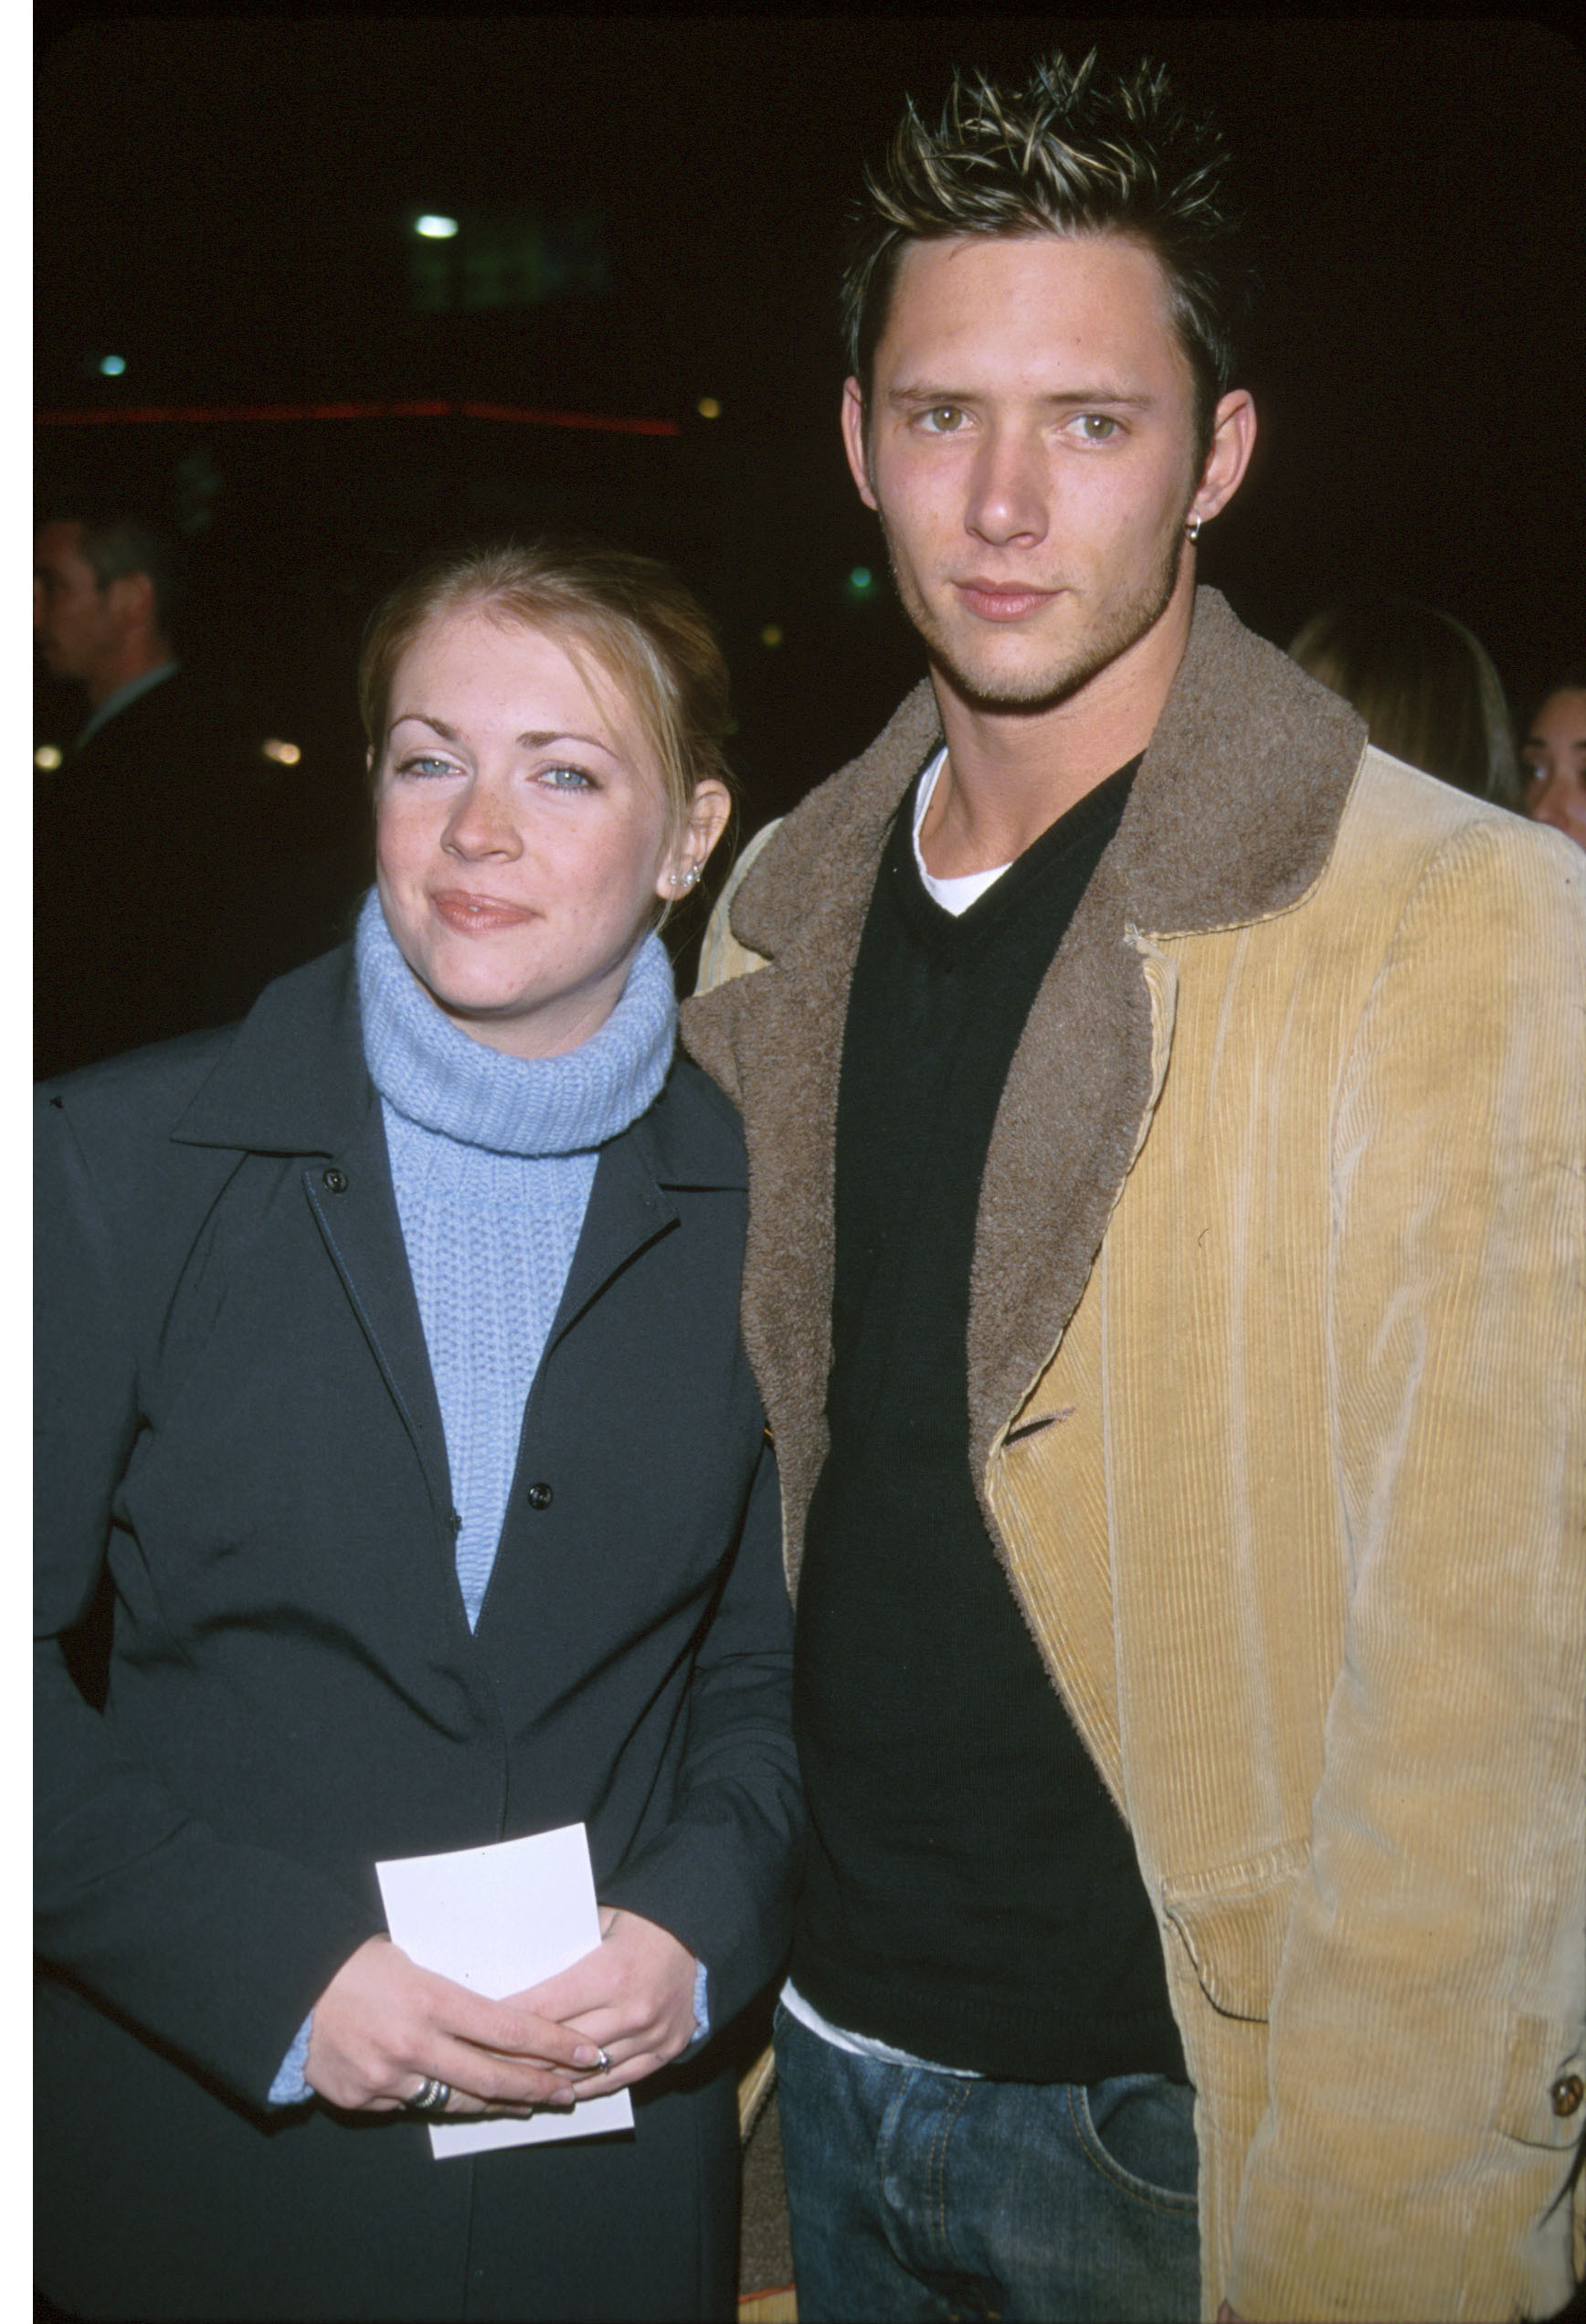 The child star and a guest during "Girl Interrupted" premiere in Hollywood, California, on December 8, 1999. | Source: Getty Images